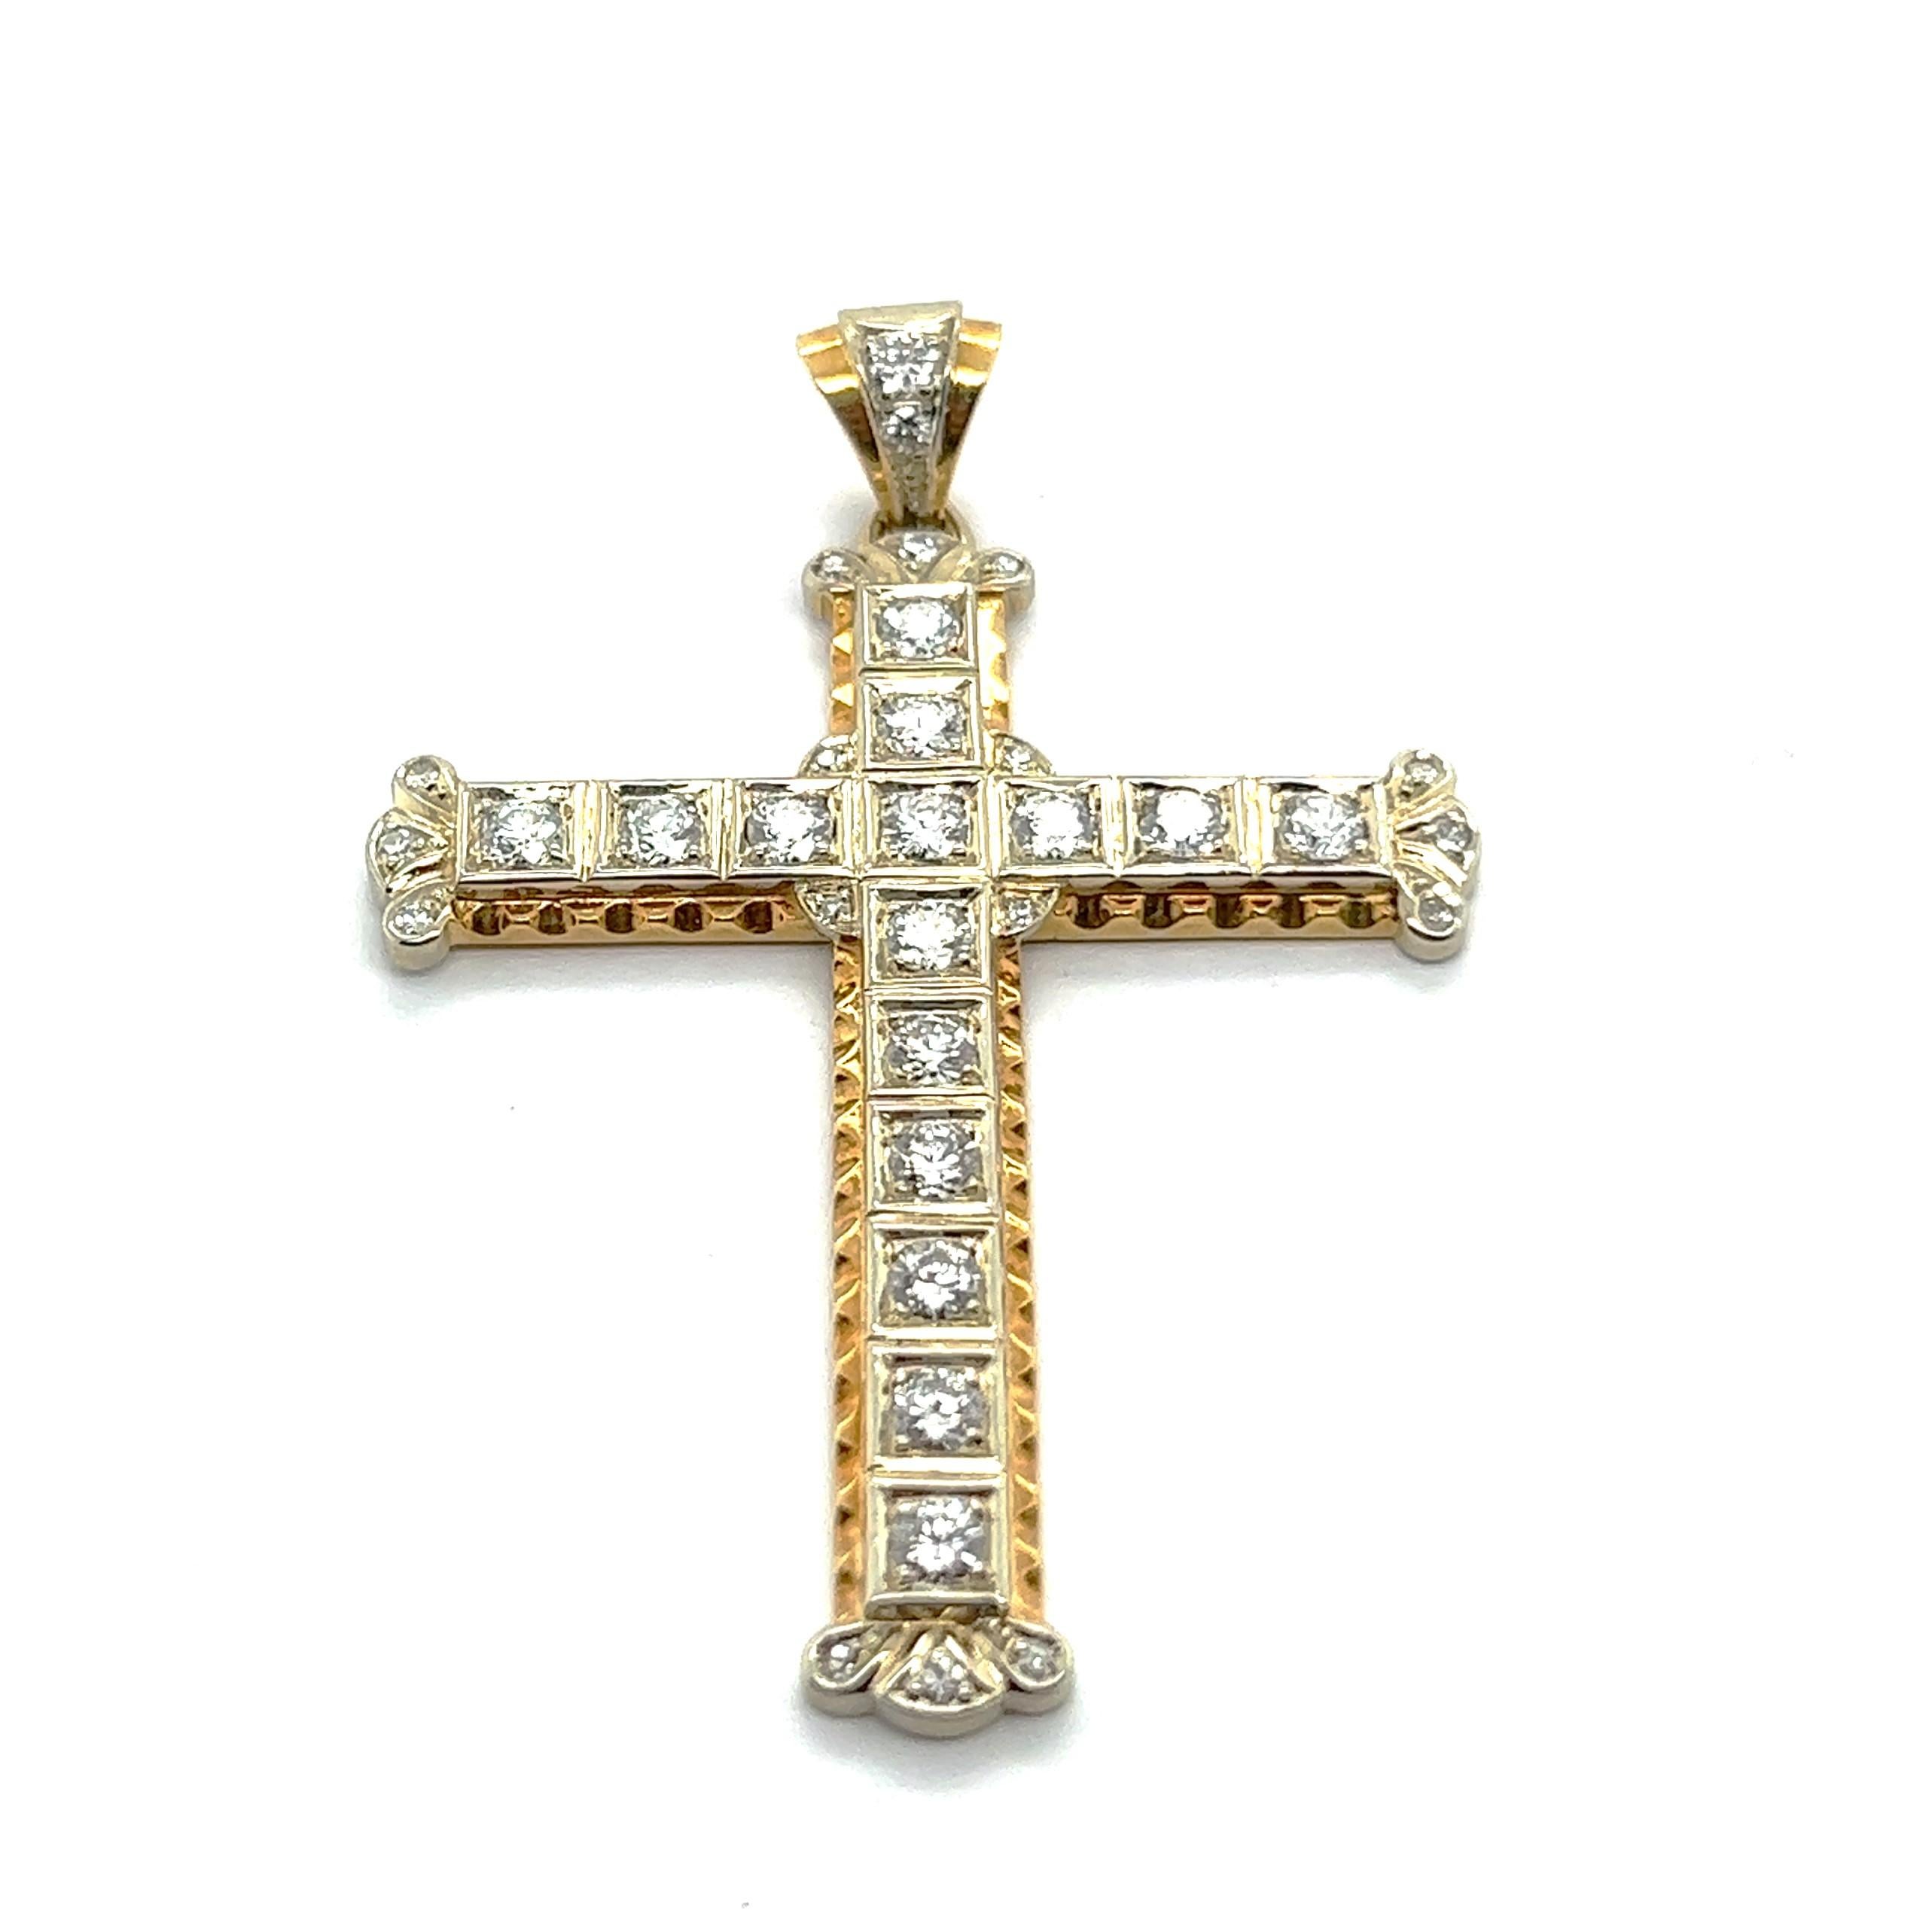 A cross pendant with diamonds, crafted in 18 Karat yellow and white gold , creating a simple yet meaningful piece. 

The 17 brilliant-cut diamonds totaling 1.10 carats give the piece elegance without being flashy. The center diamonds are